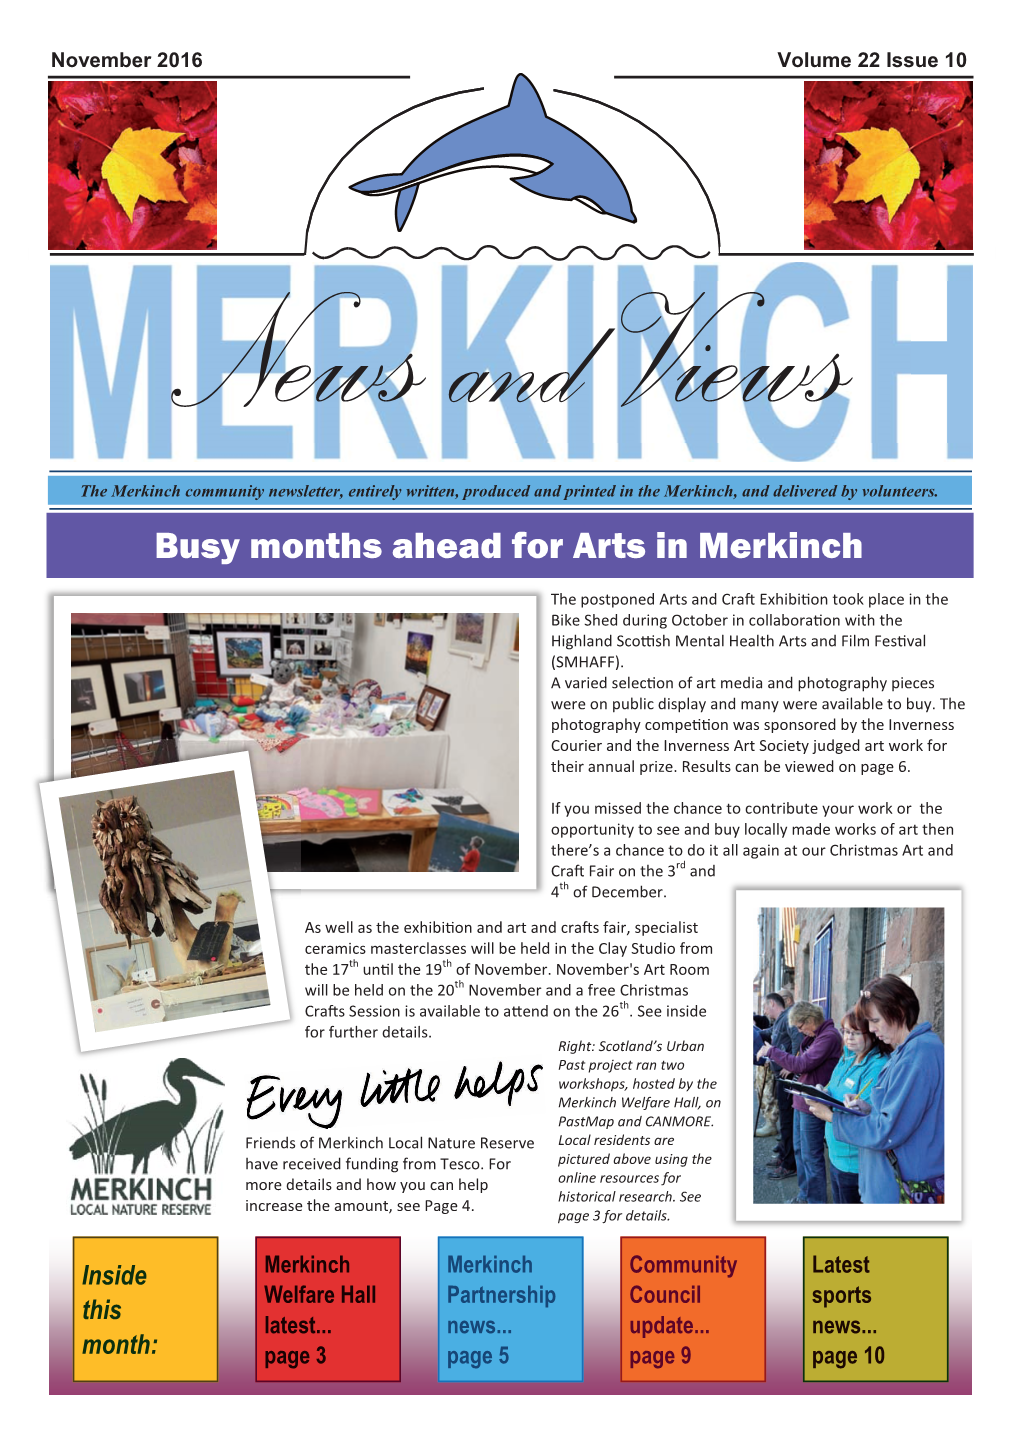 Busy Months Ahead for Arts in Merkinch